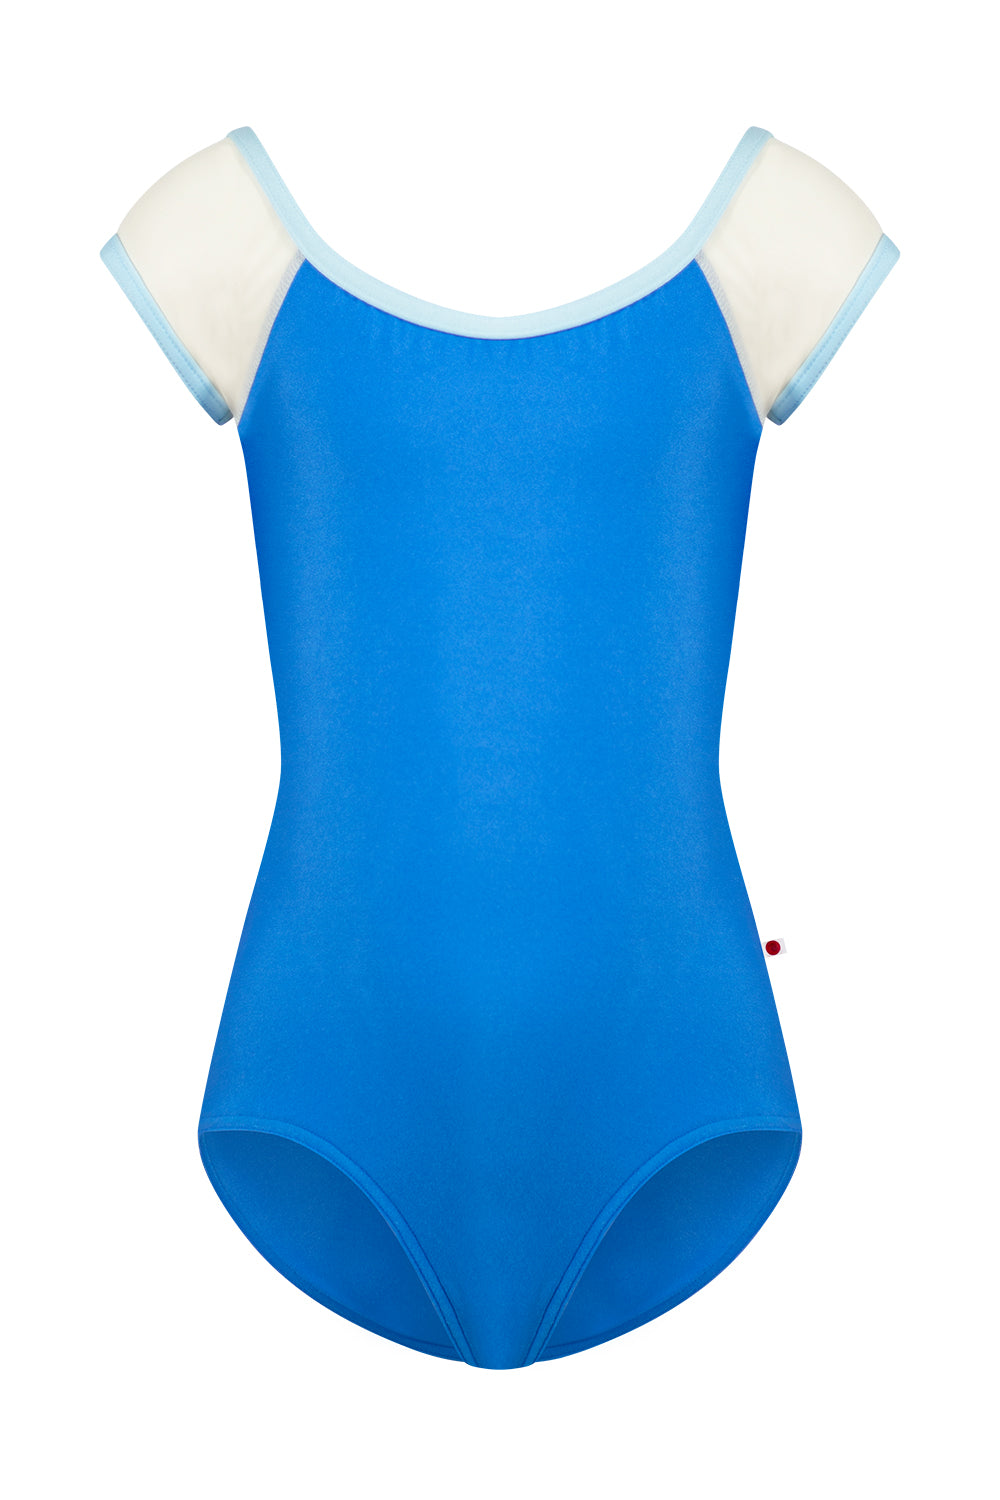 Kids Wendy leotard in N-Sky body color with Mesh Vanilla sleeve color and T-Pool trim color